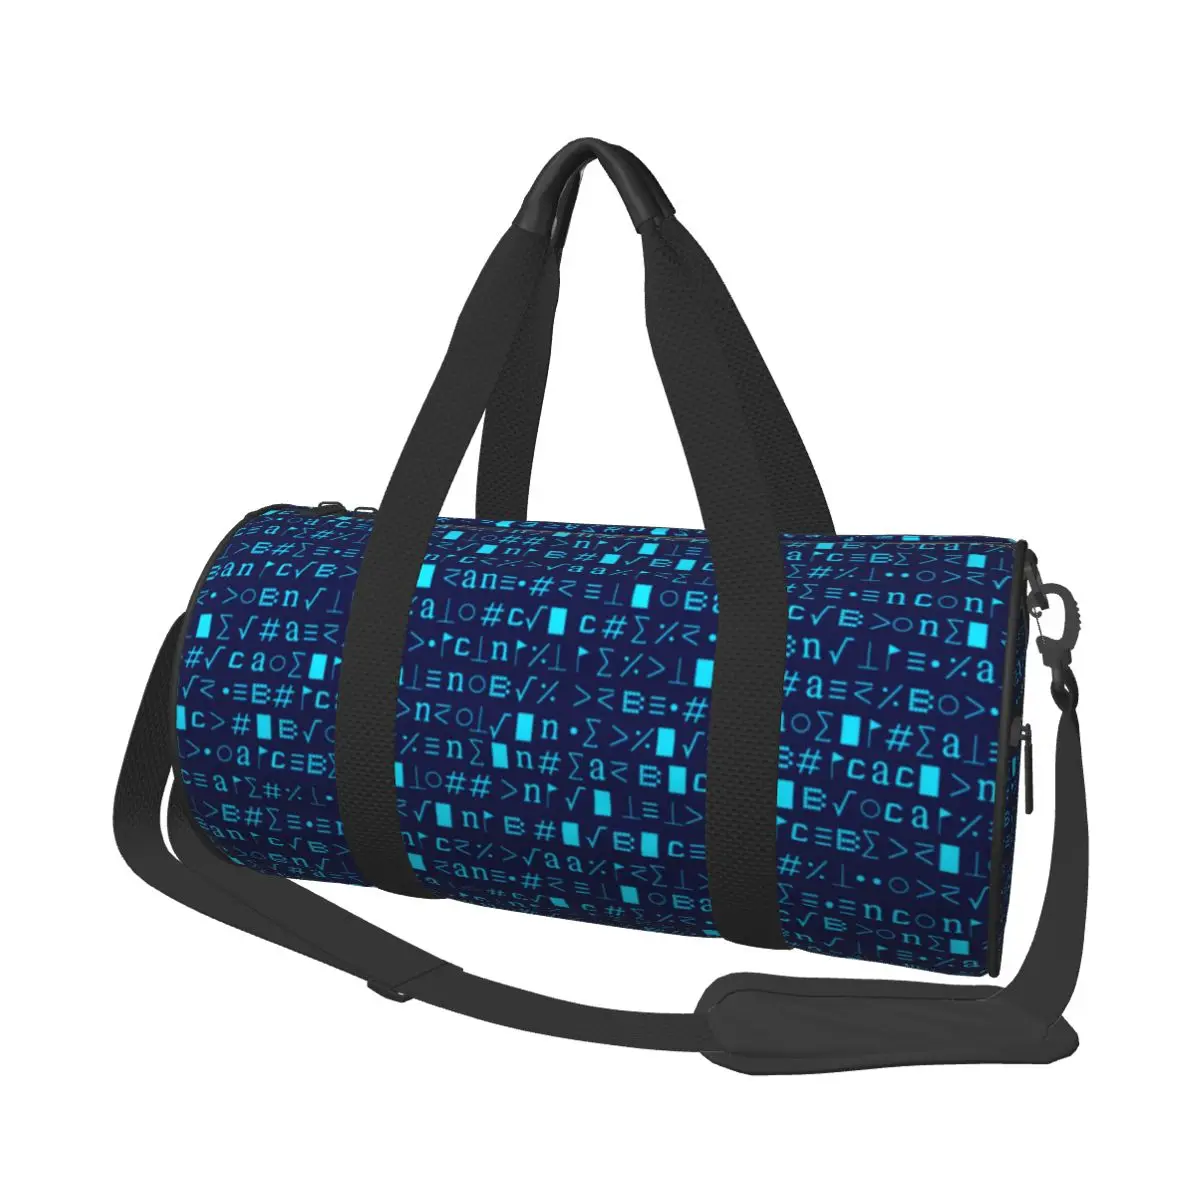 

Coding Binary Numbers Sports Bags Hacker Pop Swimming Gym Bag Large Colorful Handbags Men Design Oxford Fitness Bag